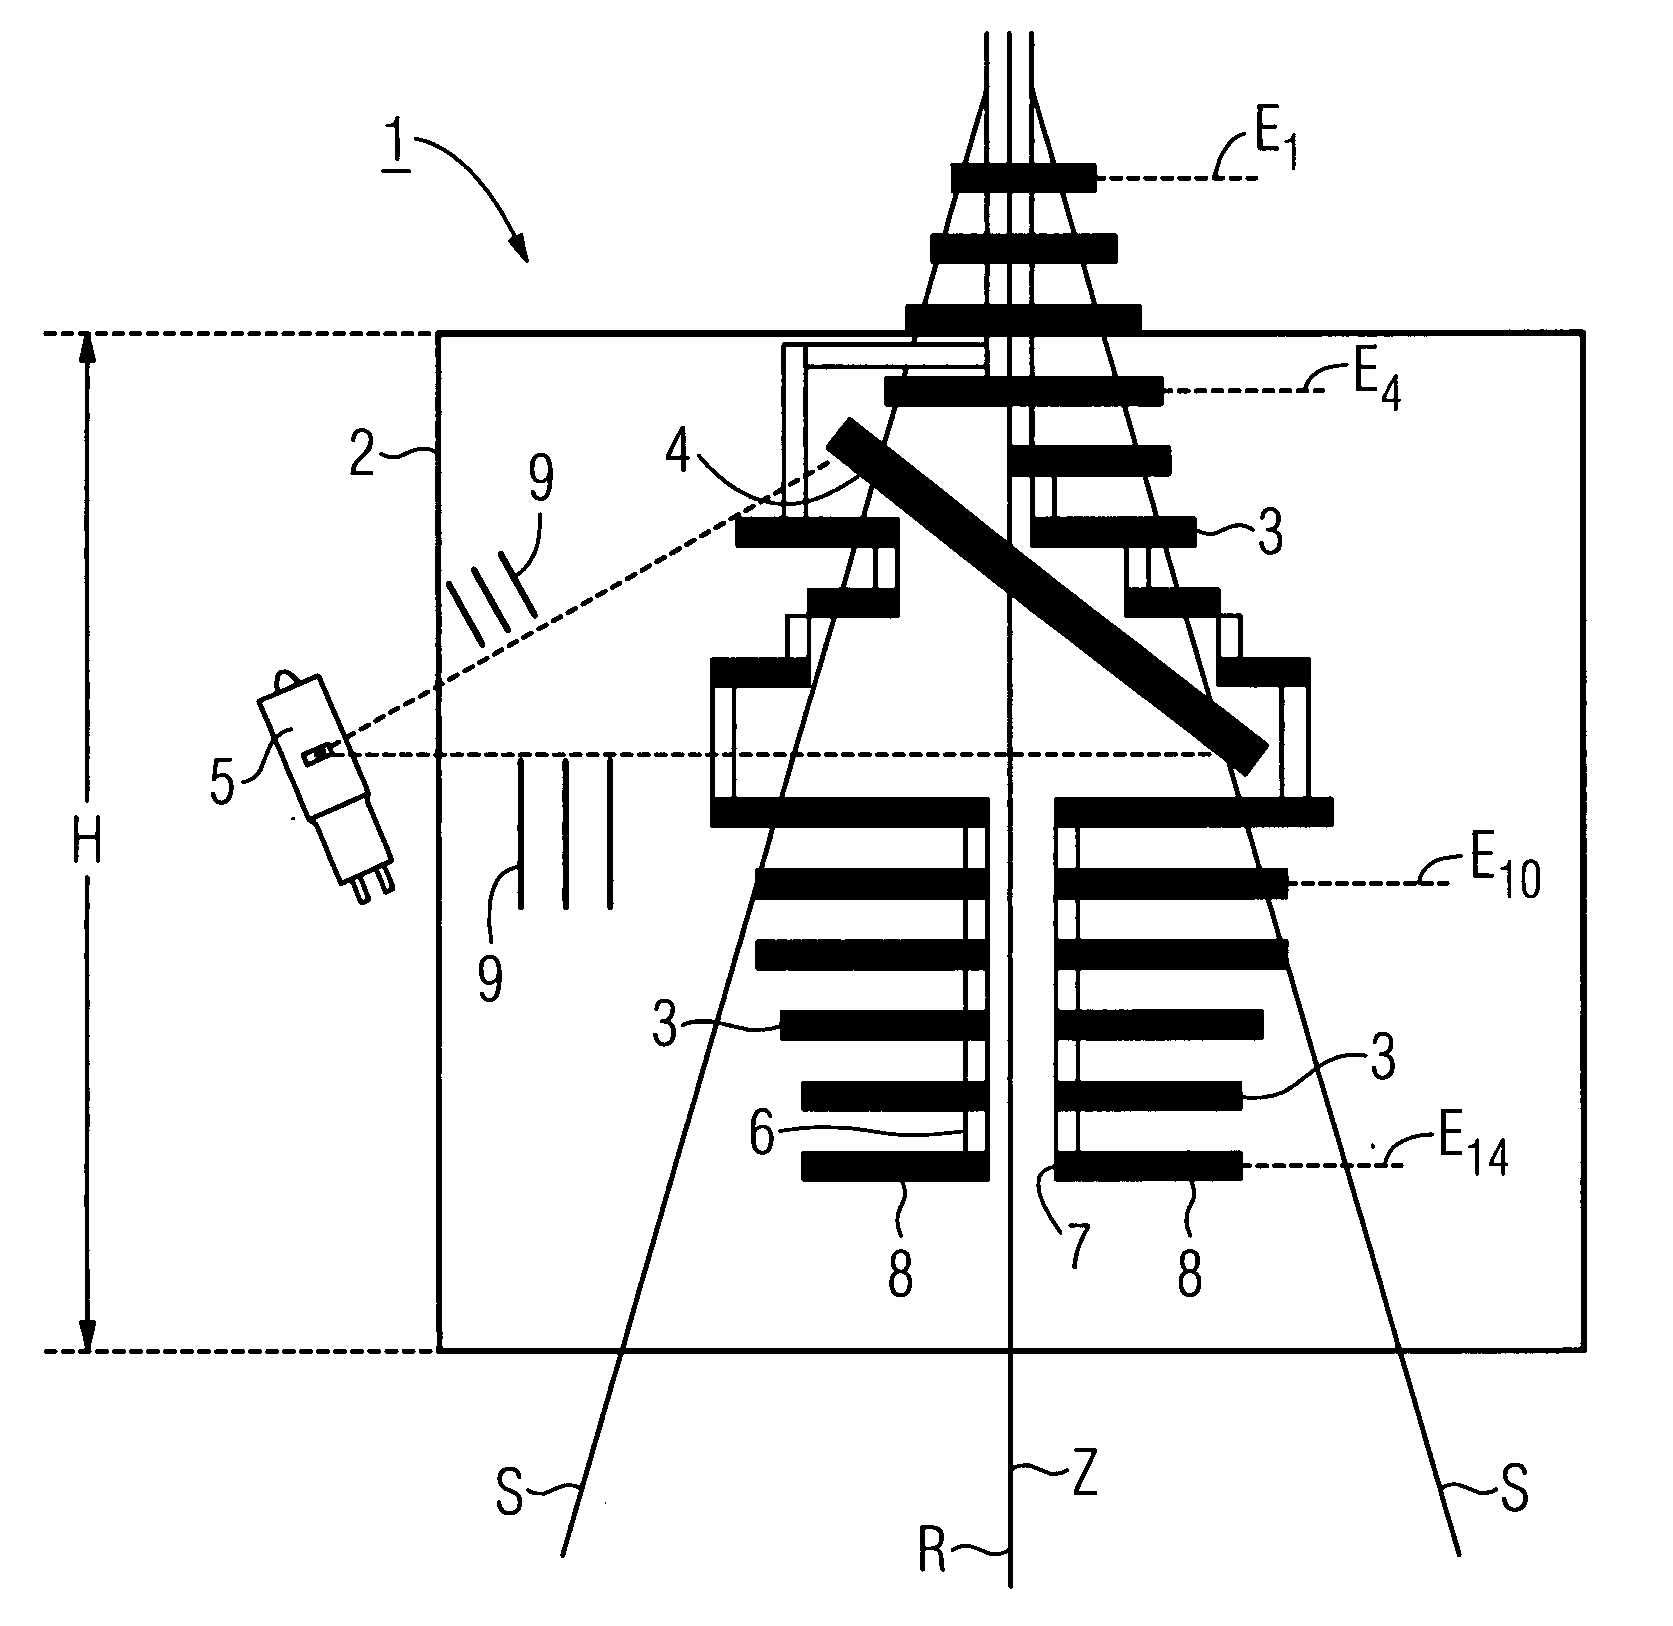 Multileaf collimator for an X-ray diagnostic device